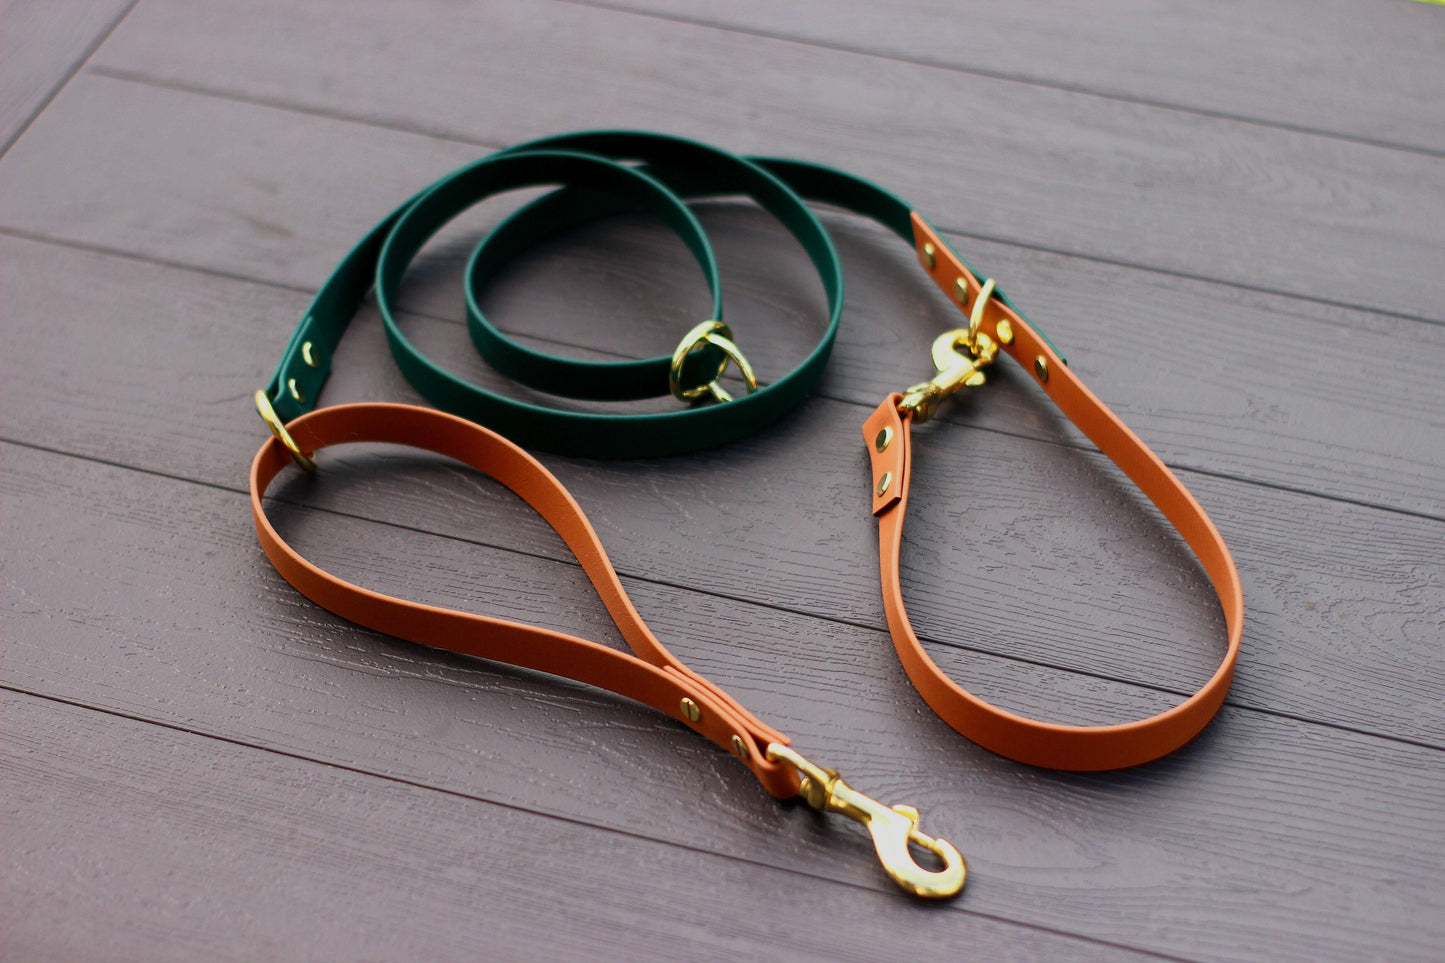 Biothane Multifunctional Dog Leash in Vibrant Orange and Green with Golden Carabiners, elegantly displayed on a wooden surface.